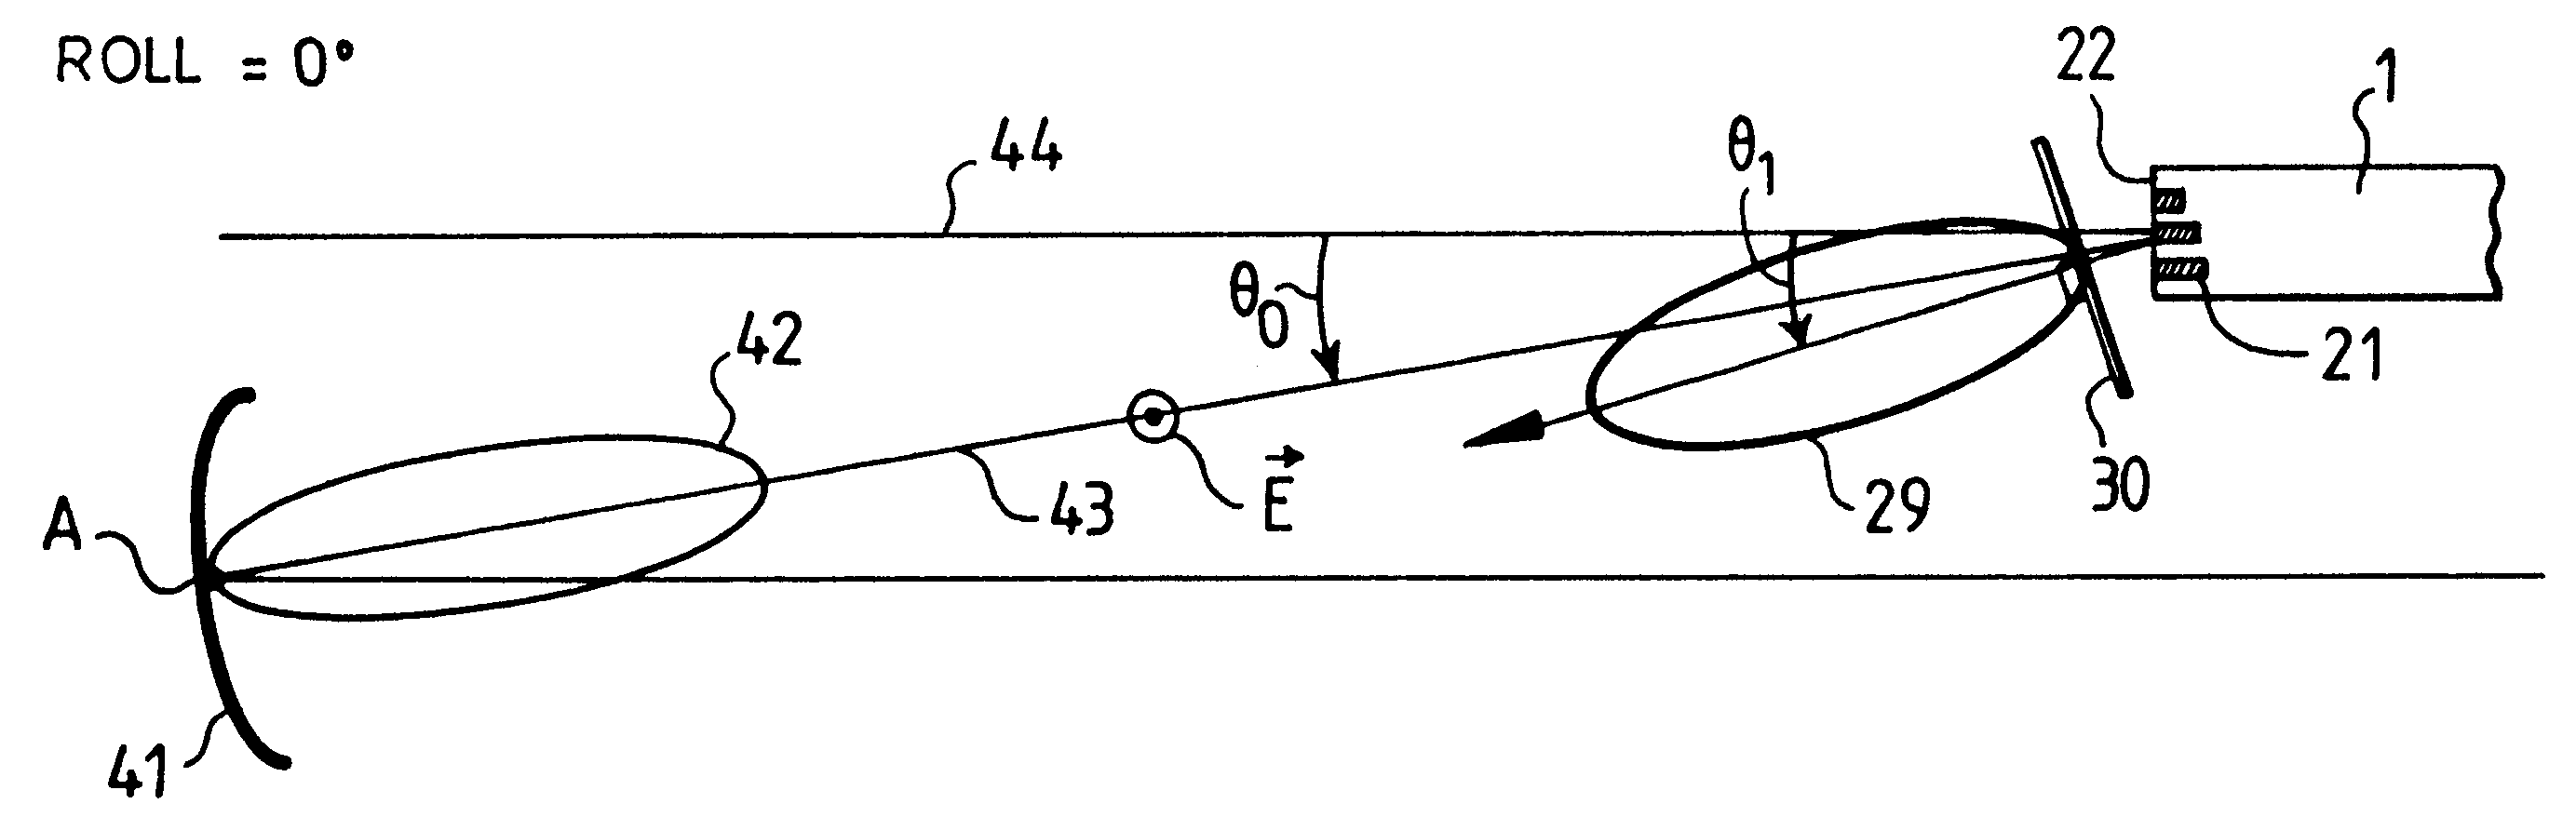 Device for the unambiguous measurement of the roll of a projectile and application to the correction of the path of a projectile